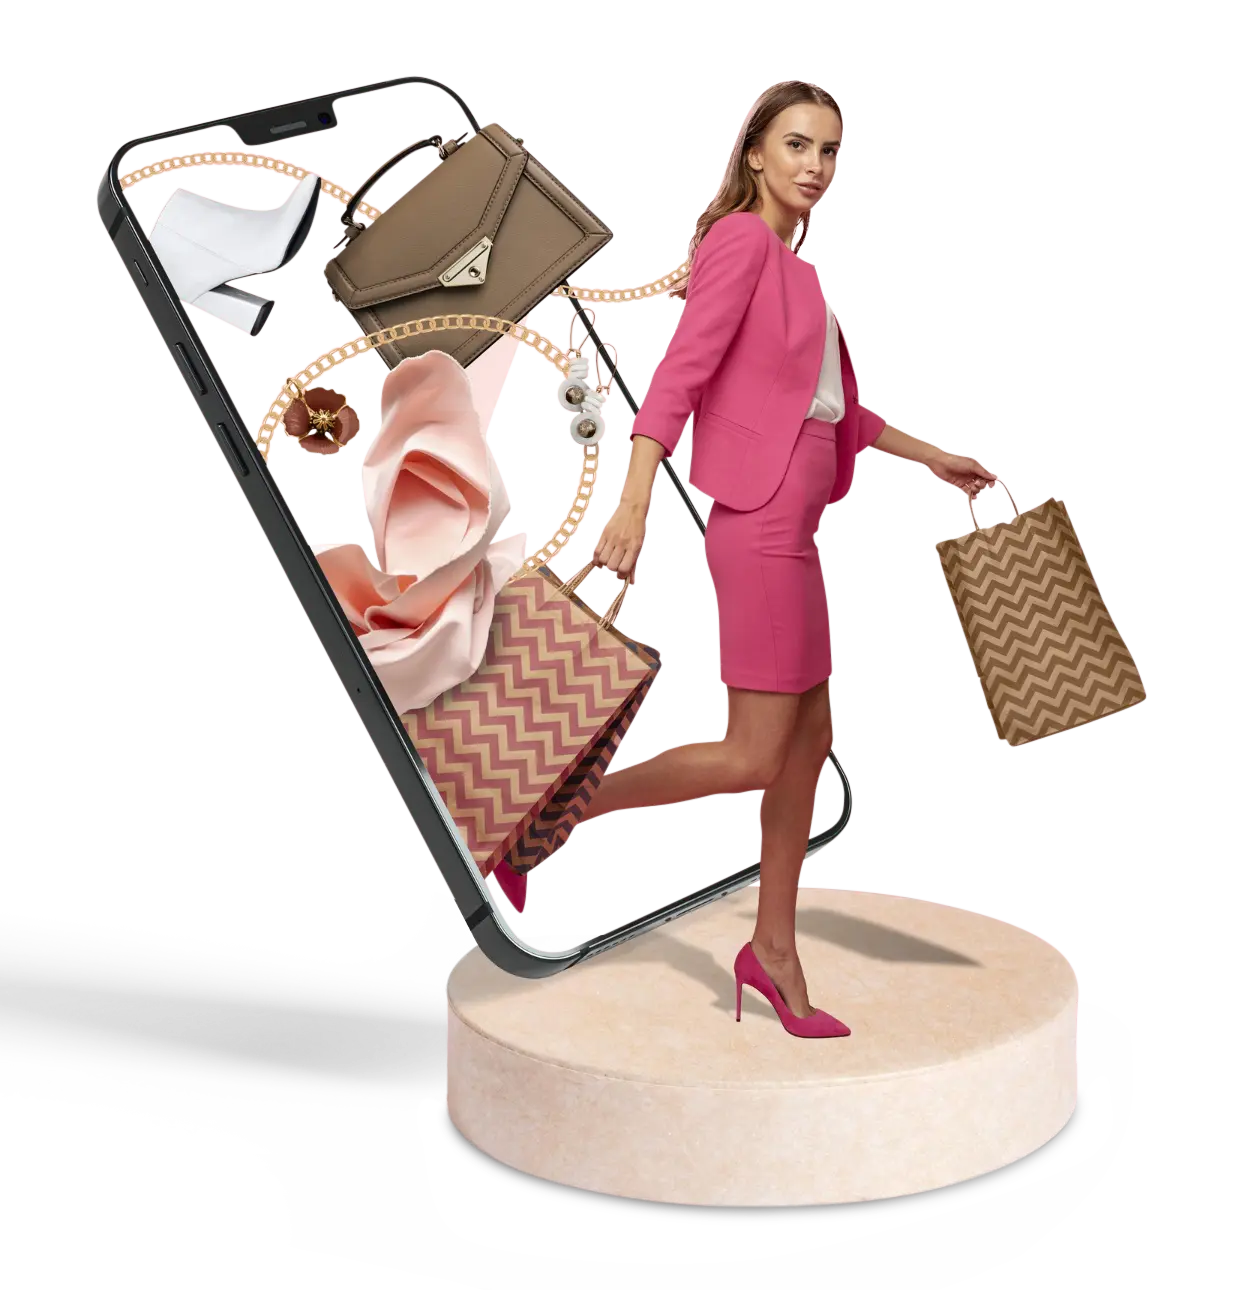 a woman in pink suit and shoes holding bags with various fashion items floating around her on a stylized graphic background.